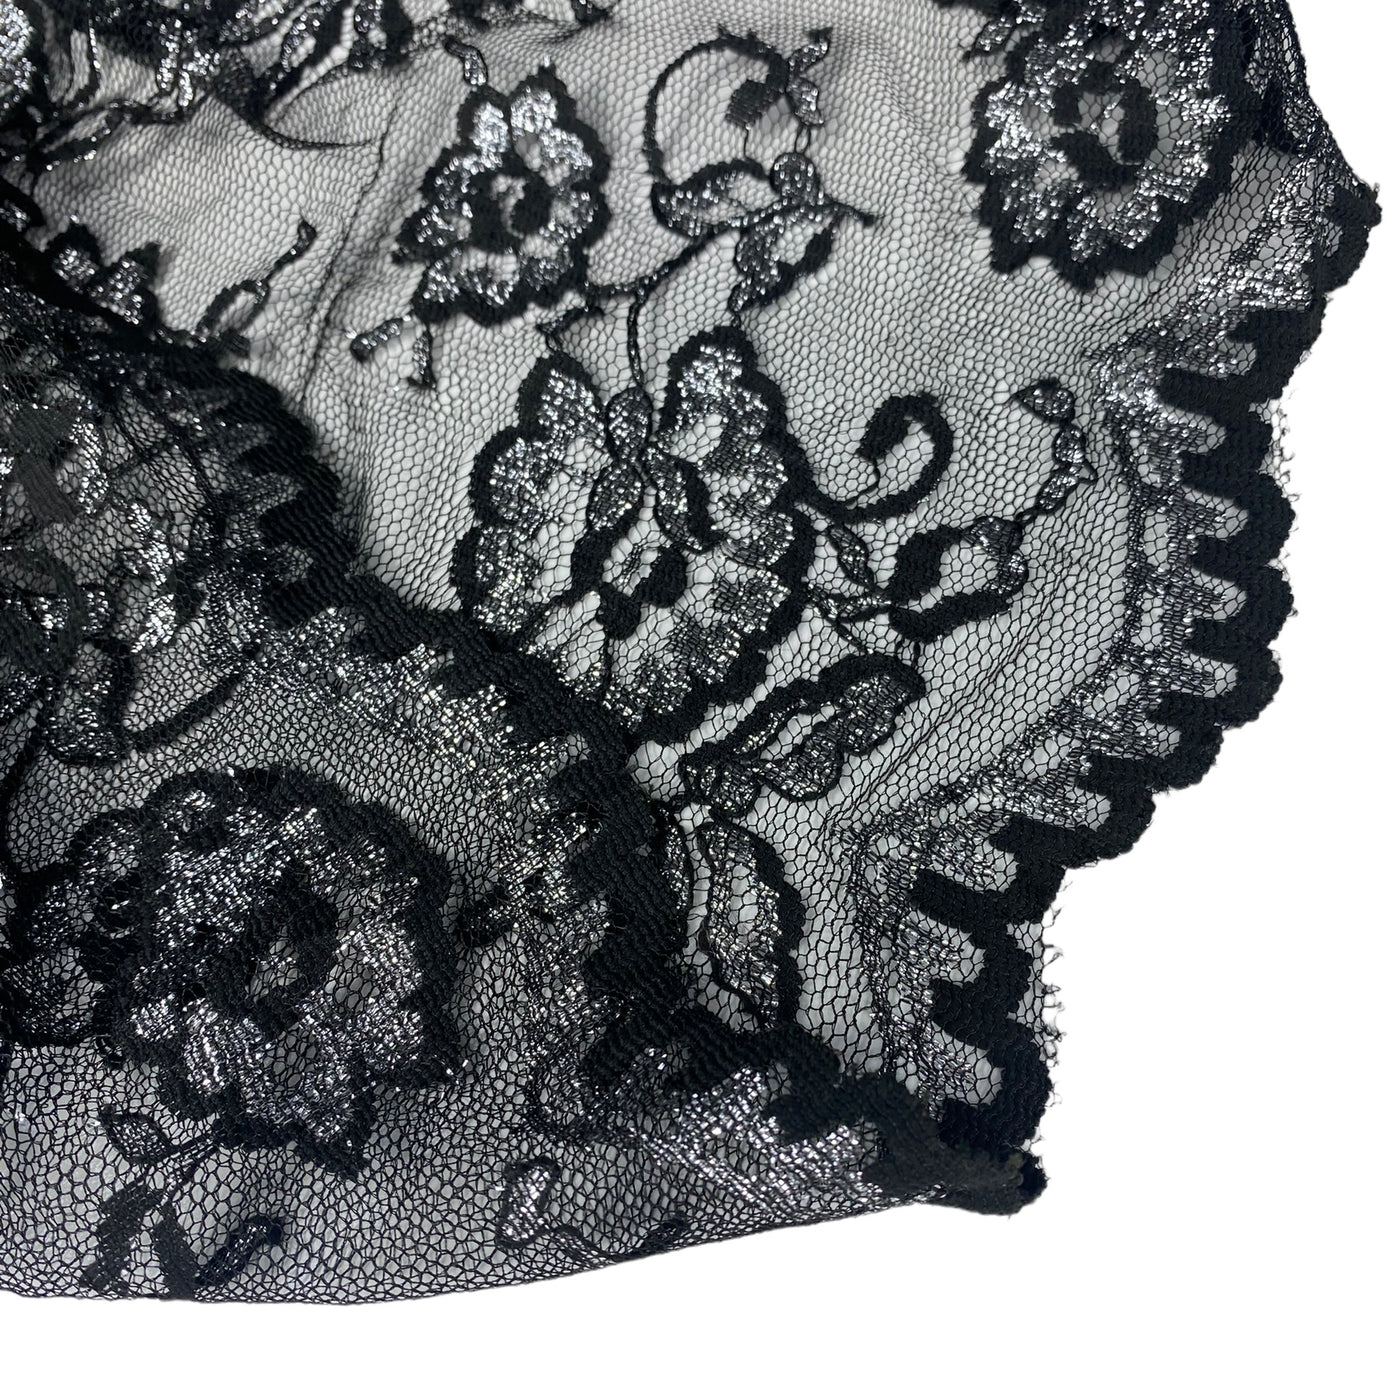 Floral Embroidered Lace with Finished Edges - Black/Silver